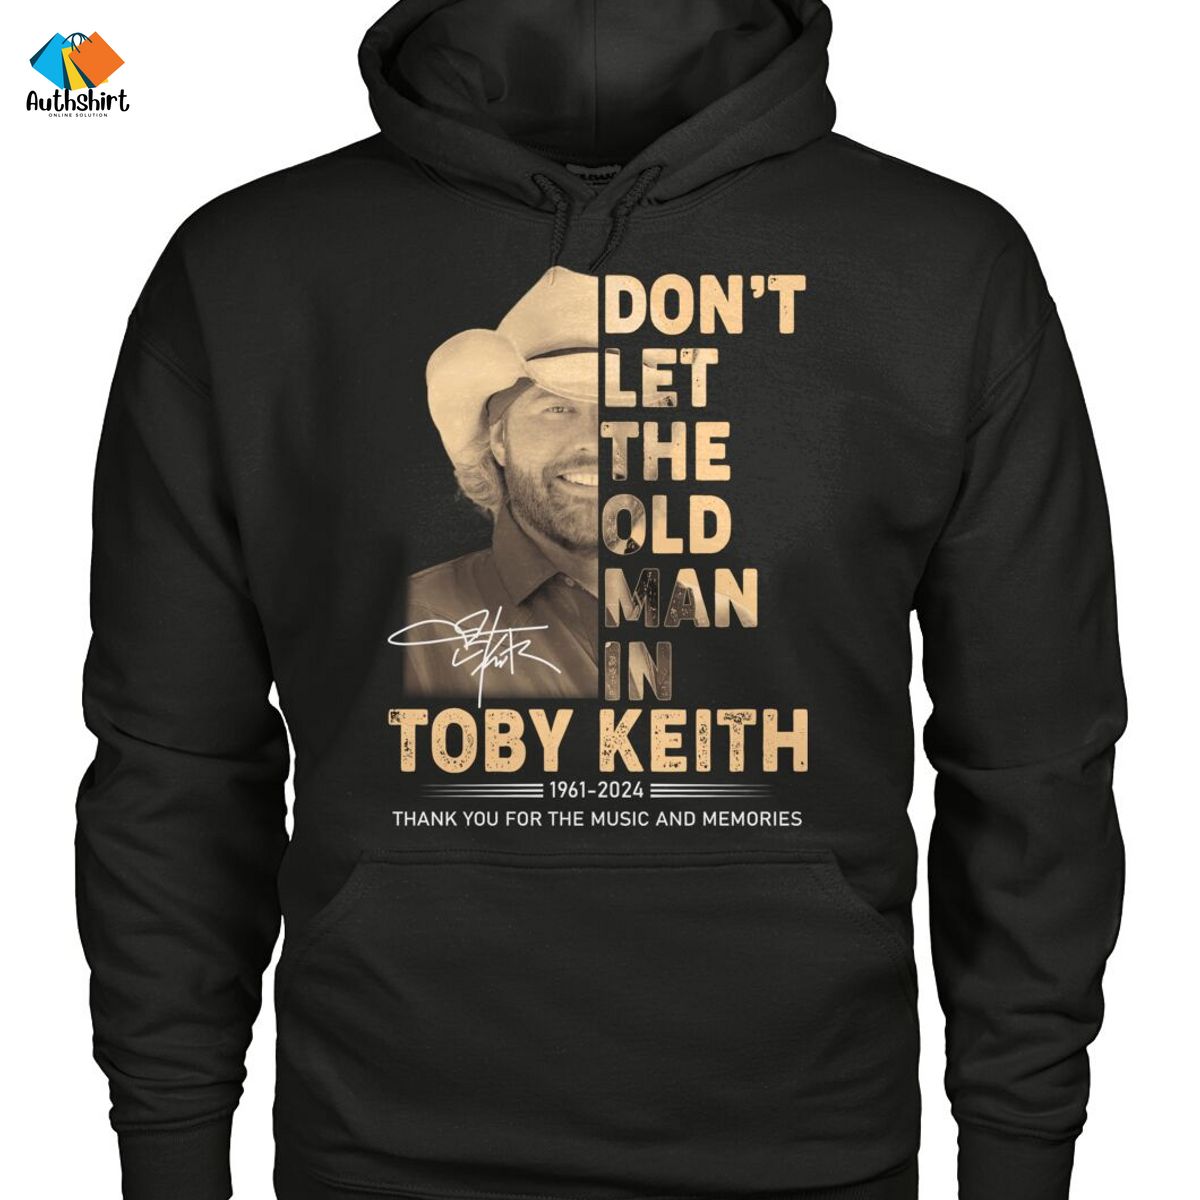 Don’t Let The Old Man In Toby Keith Thank You For The Music And Memories Shirt